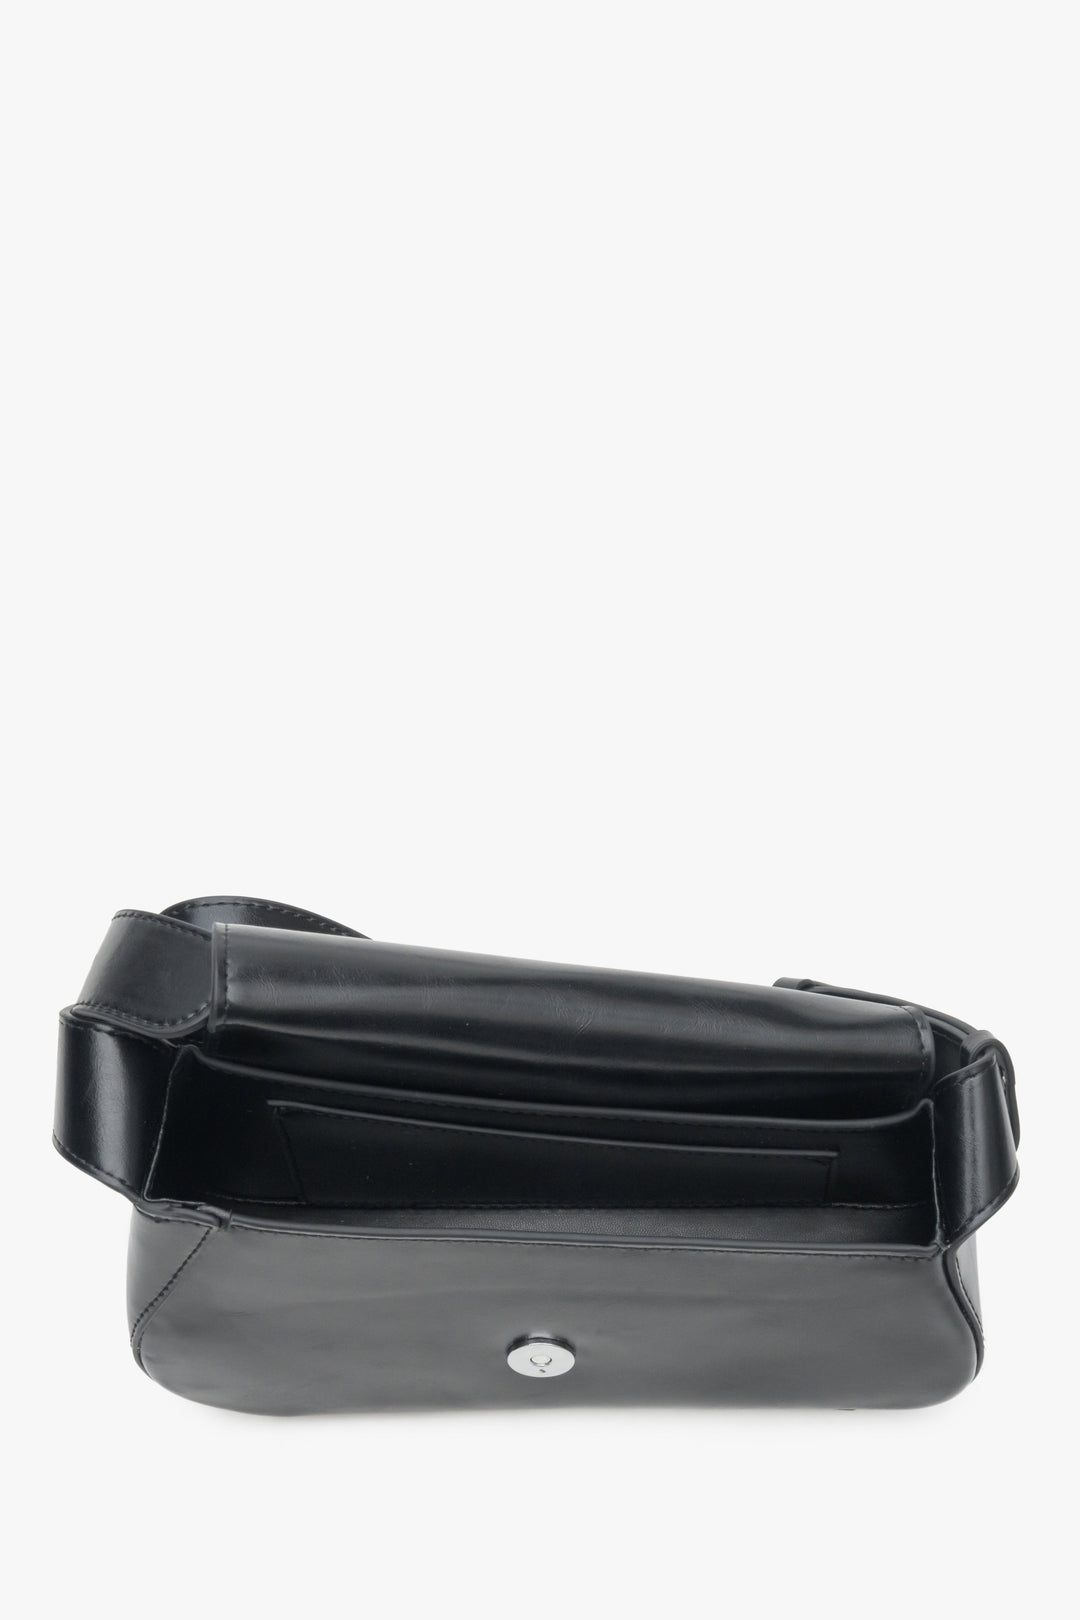 Estro's women's black baguette bag made of genuine leather - close-up of the interior of the model.